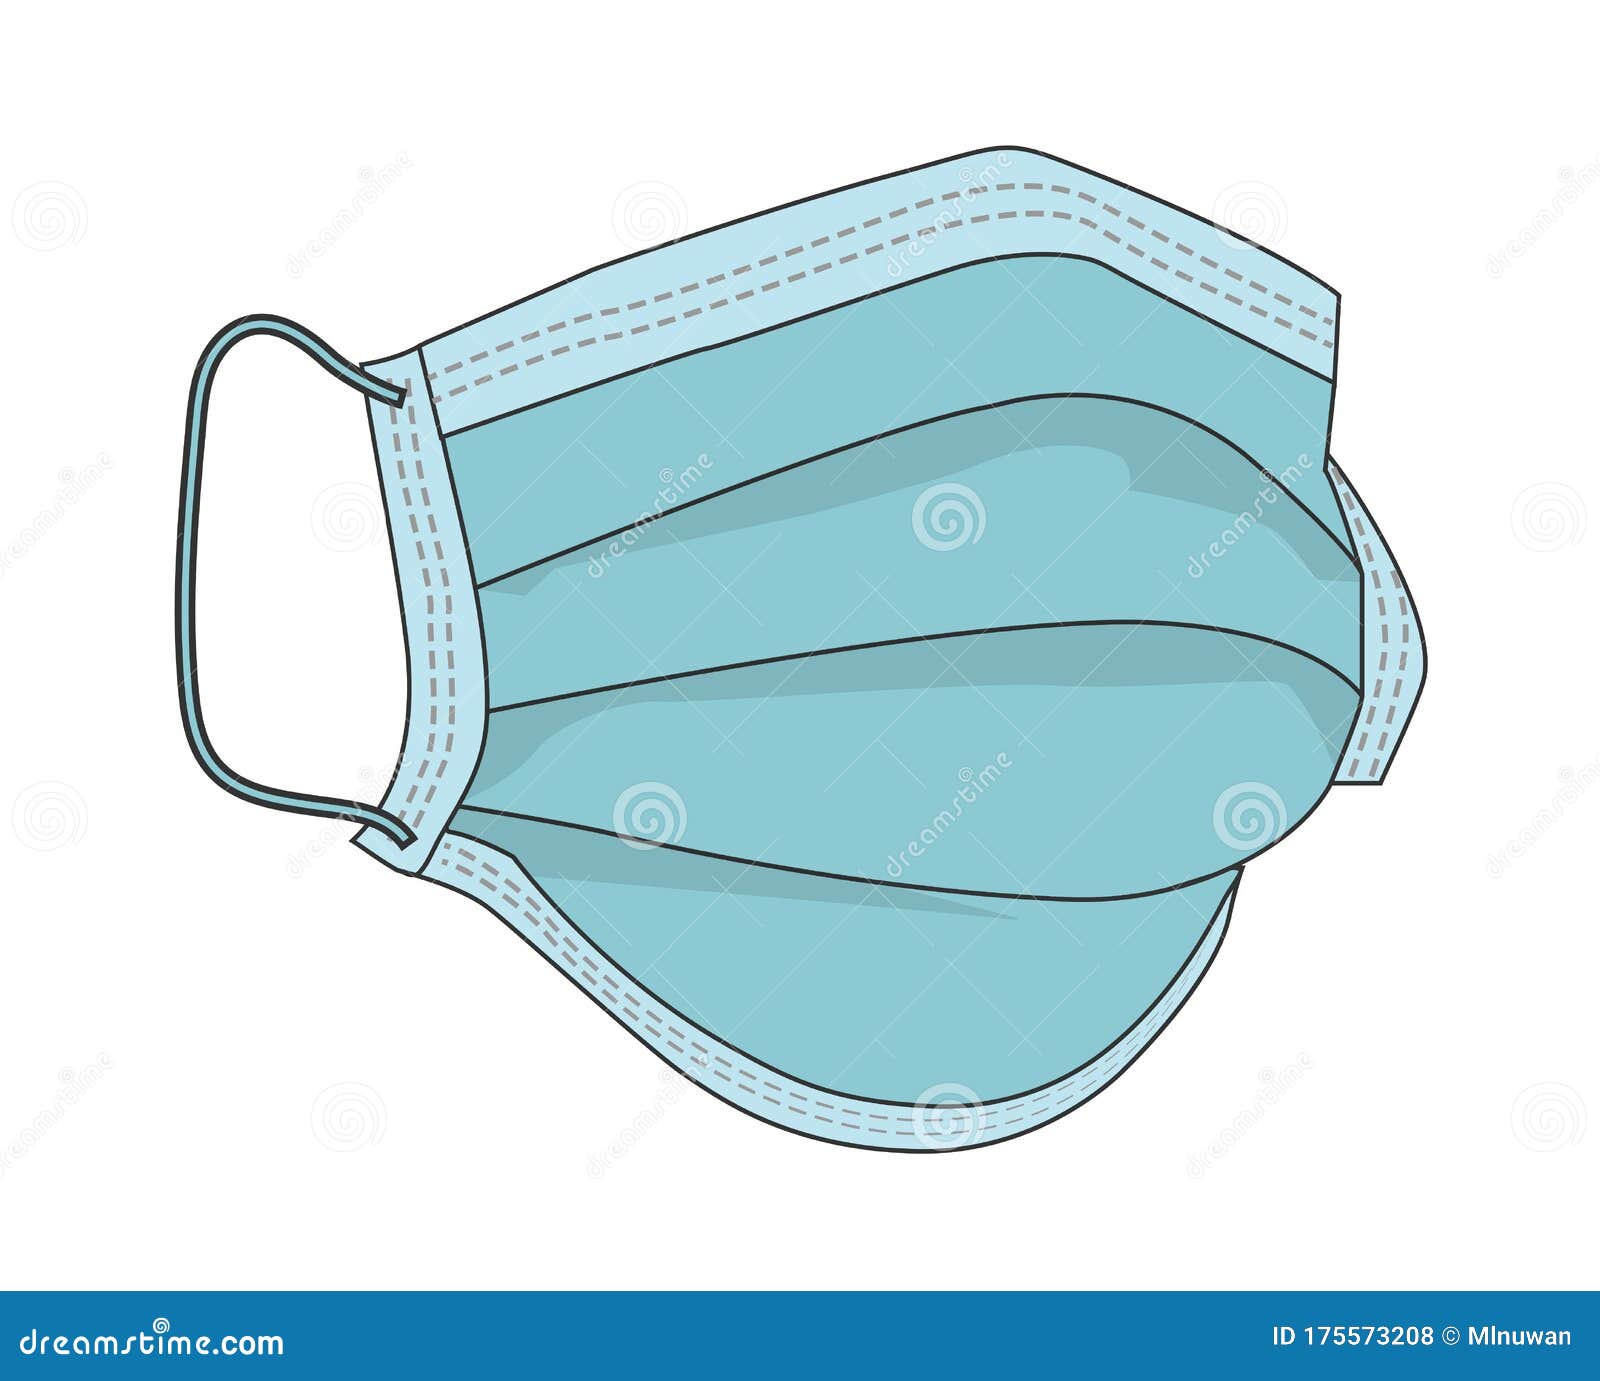 hygienic mask or surgical earloop face mask in 